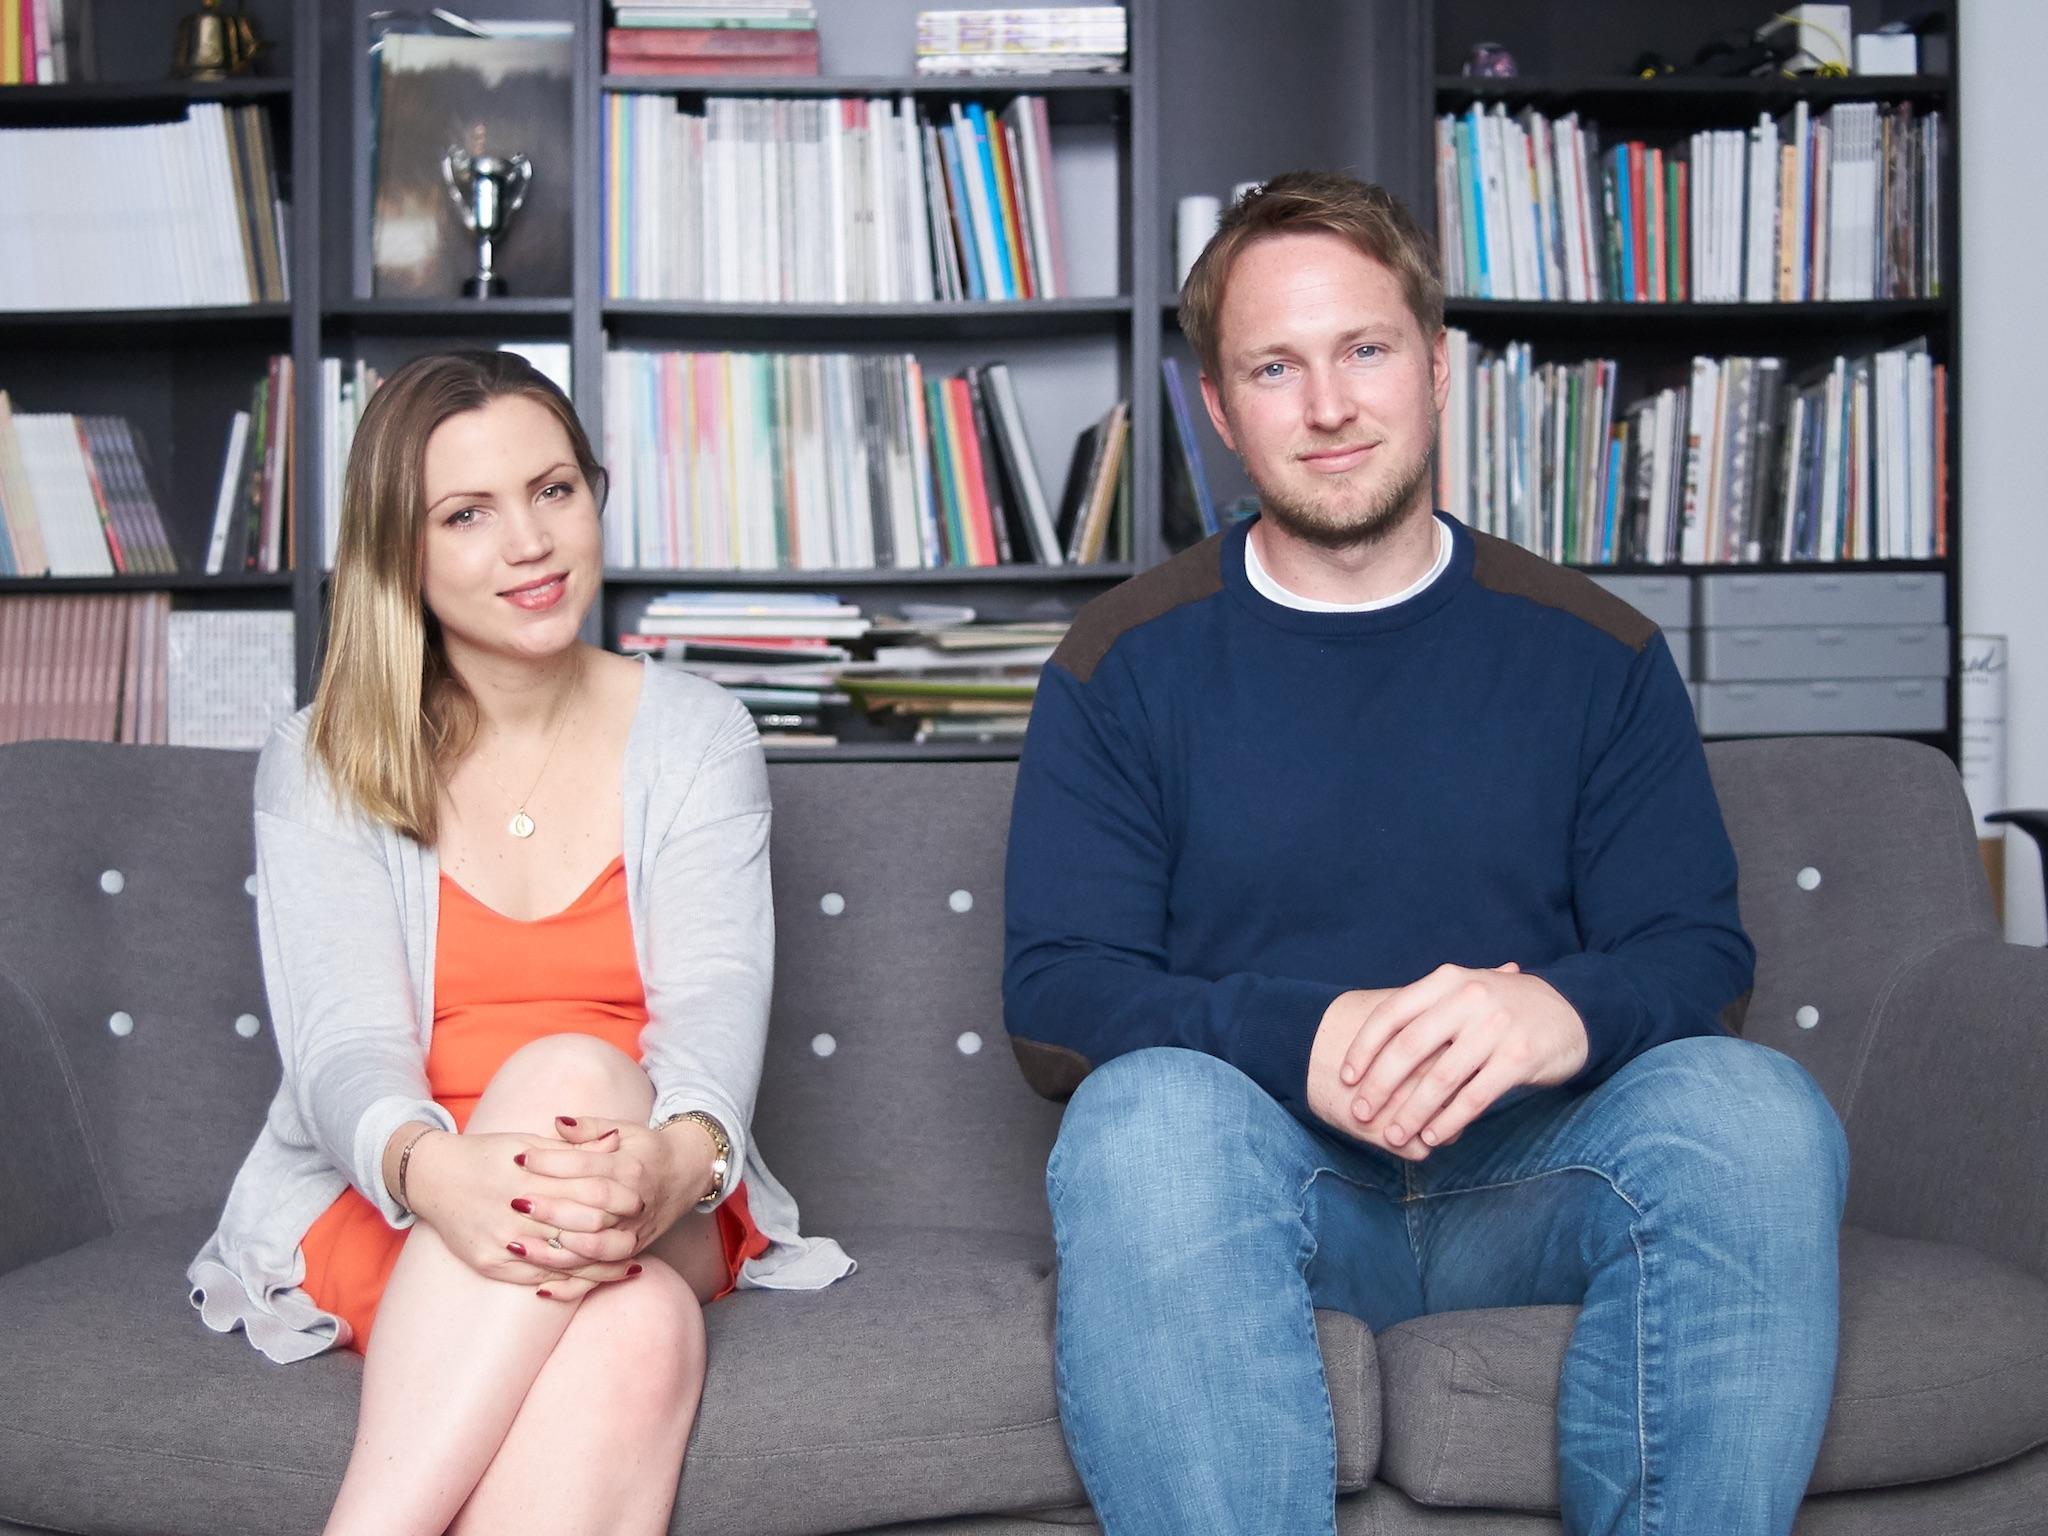 Friends and business partners Andrew O’Brien and Francesca Hodgson founded Goodbox in 2016